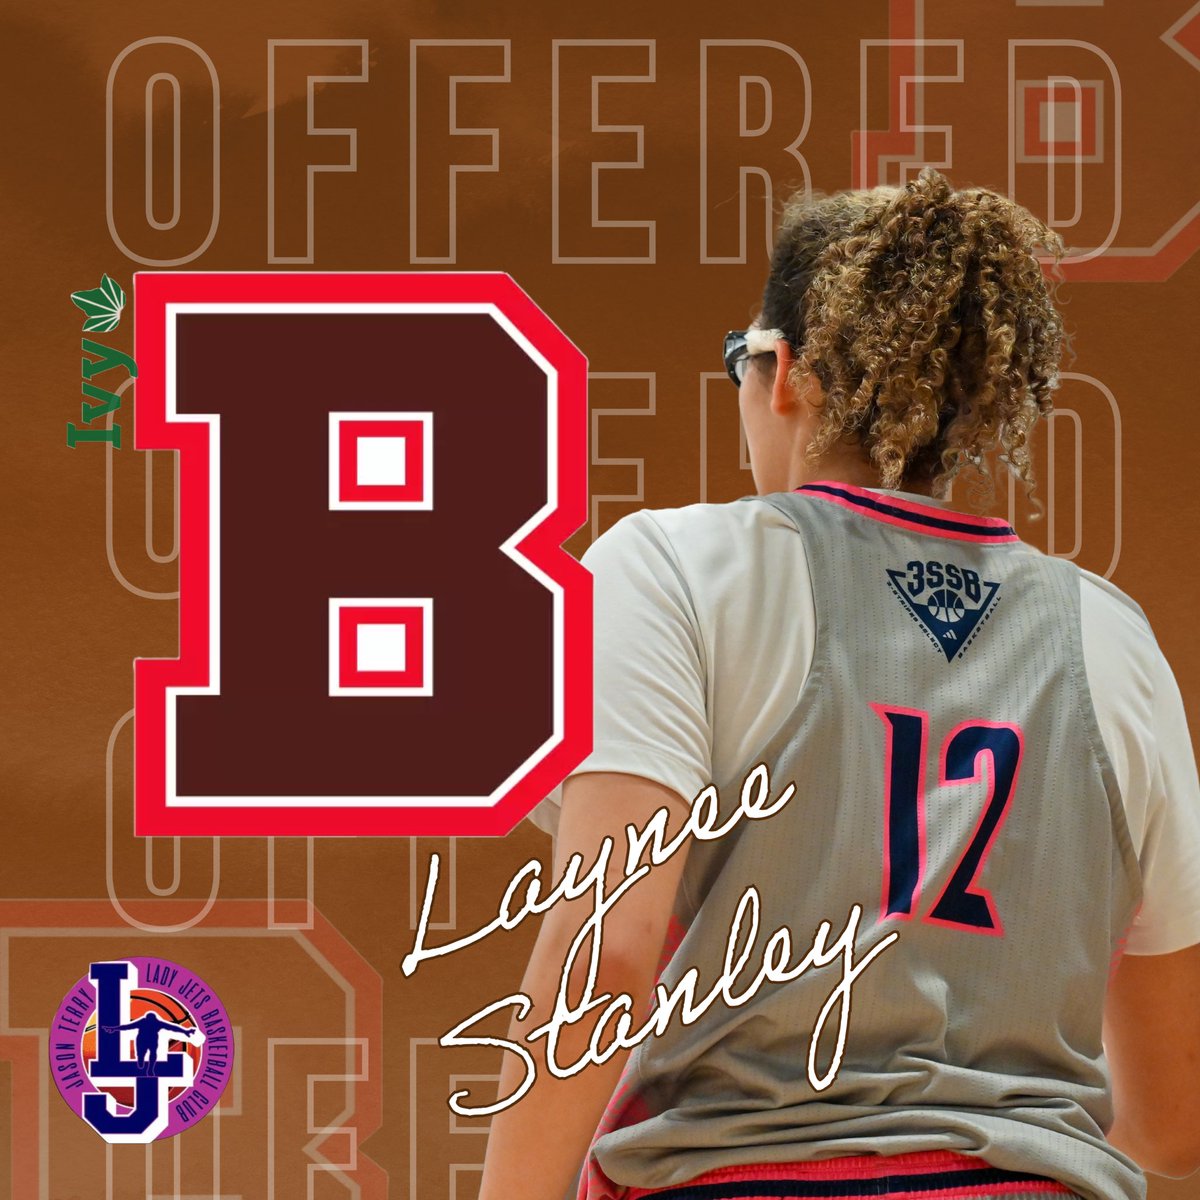 After an amazing call with Coach Monique LeBlanc, I am blessed to receive an offer to further my education & basketball career at @BrownU_WBB! Thank you for taking time to watch me & my team and for believing in me. 🤎 
@PGHOklahoma @OKGirlsHoops @abovelinehoops @TheUncommitted0